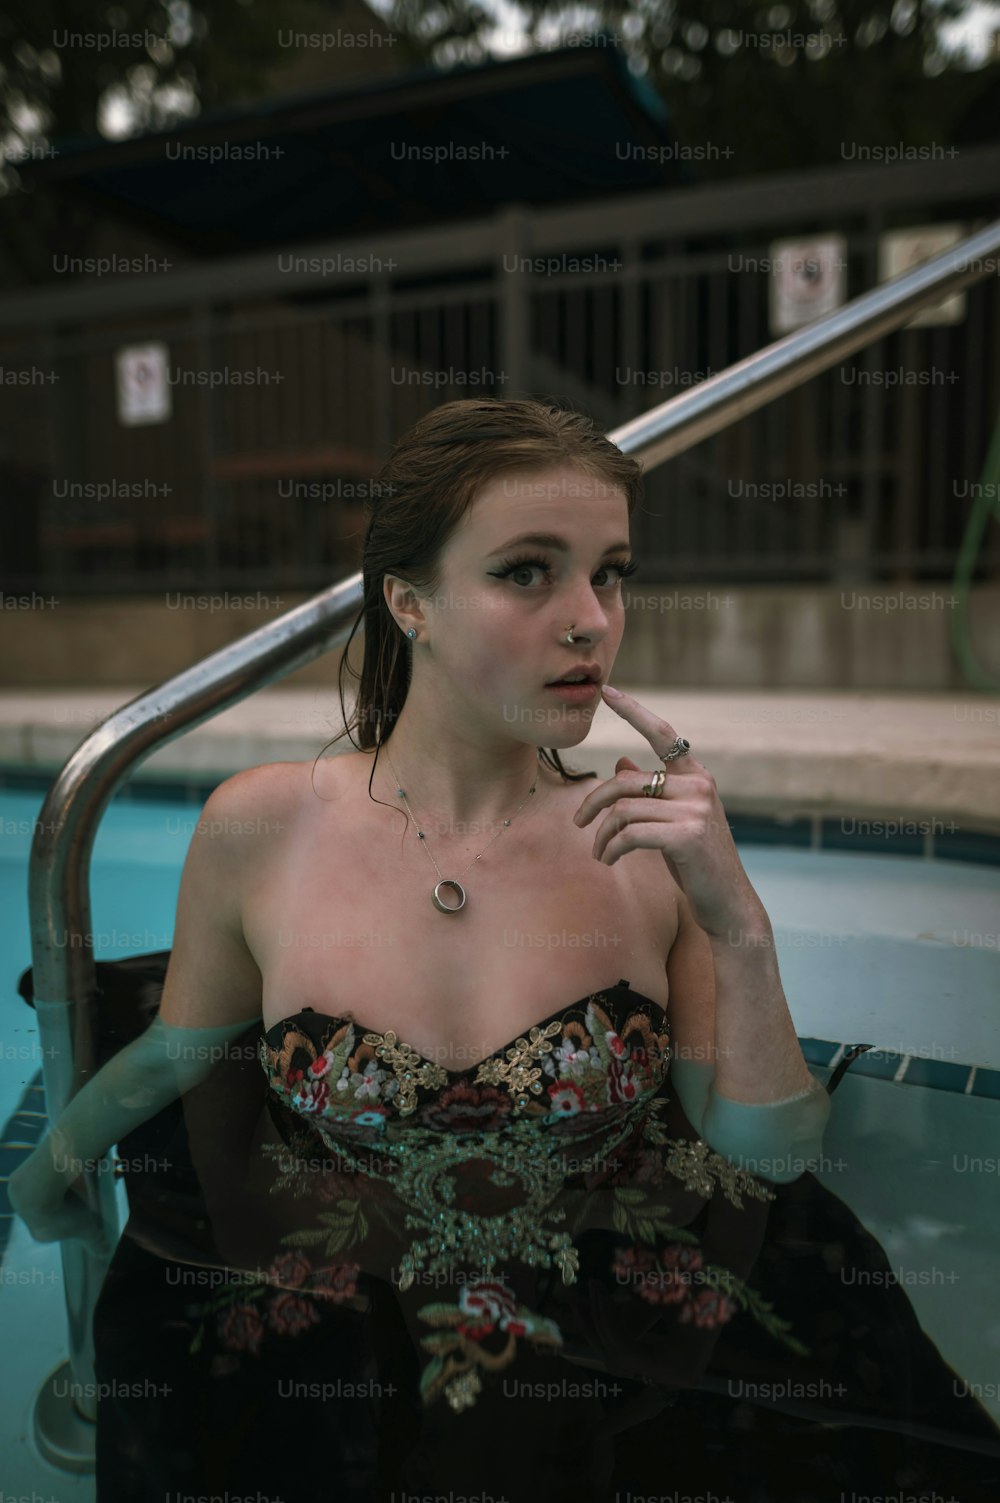 a woman sitting in a pool smoking a cigarette